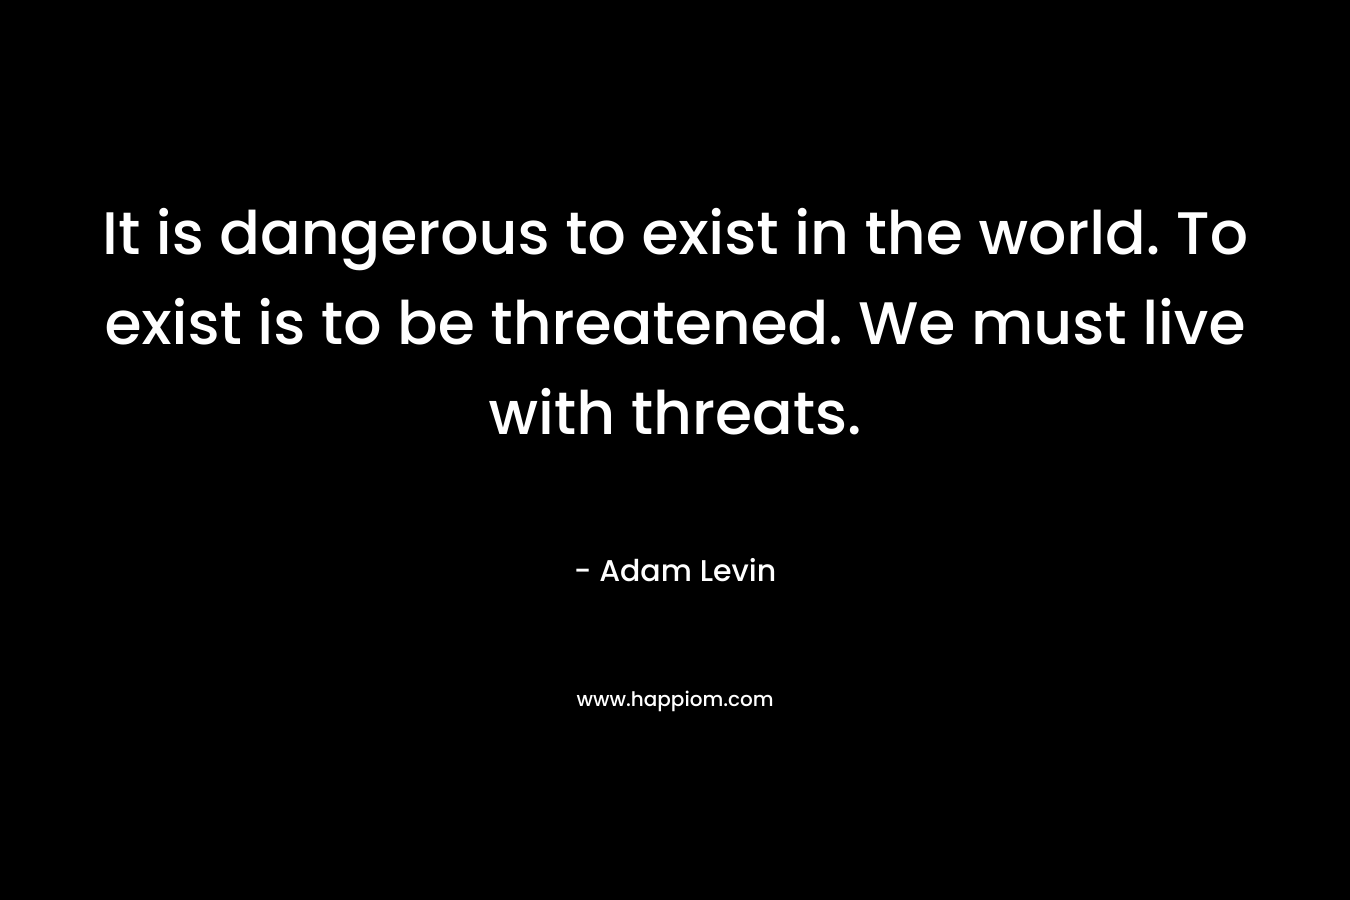 It is dangerous to exist in the world. To exist is to be threatened. We must live with threats. – Adam Levin